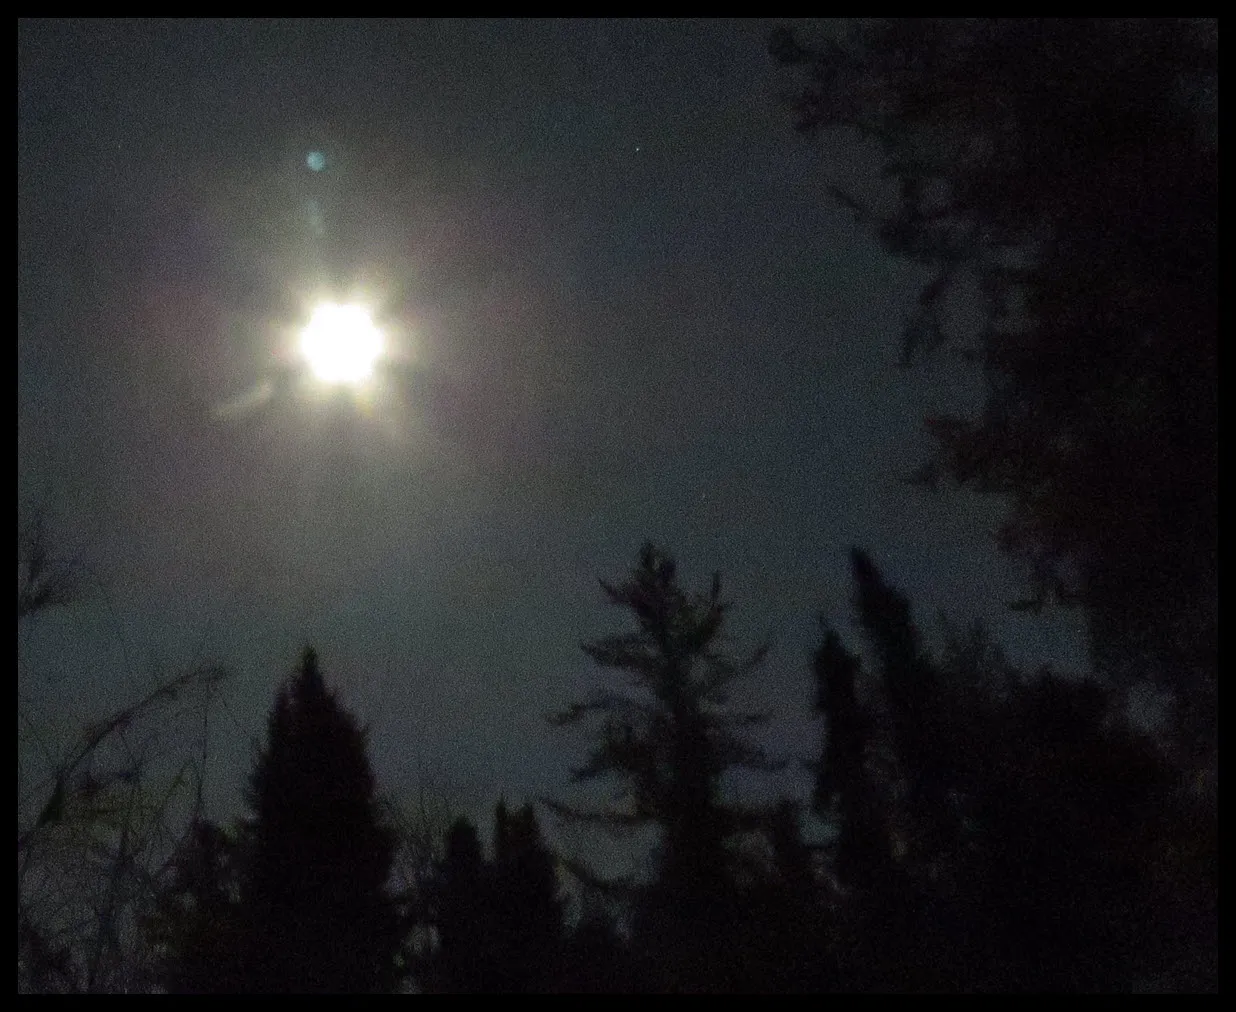 bright full moon with moonbean rays above silhouettes of spruce and pine trees dark sky.JPG